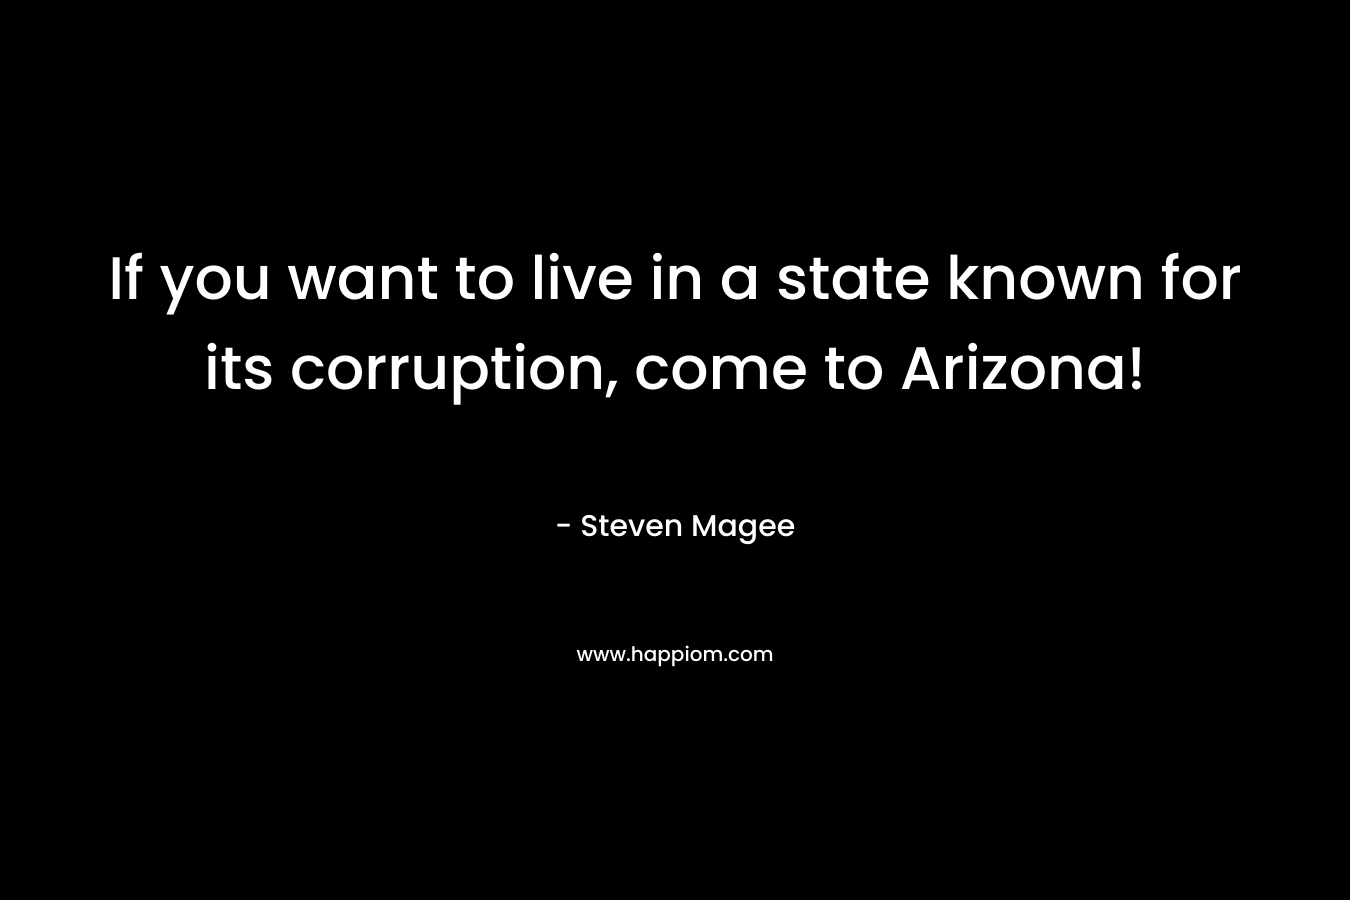 If you want to live in a state known for its corruption, come to Arizona! – Steven Magee